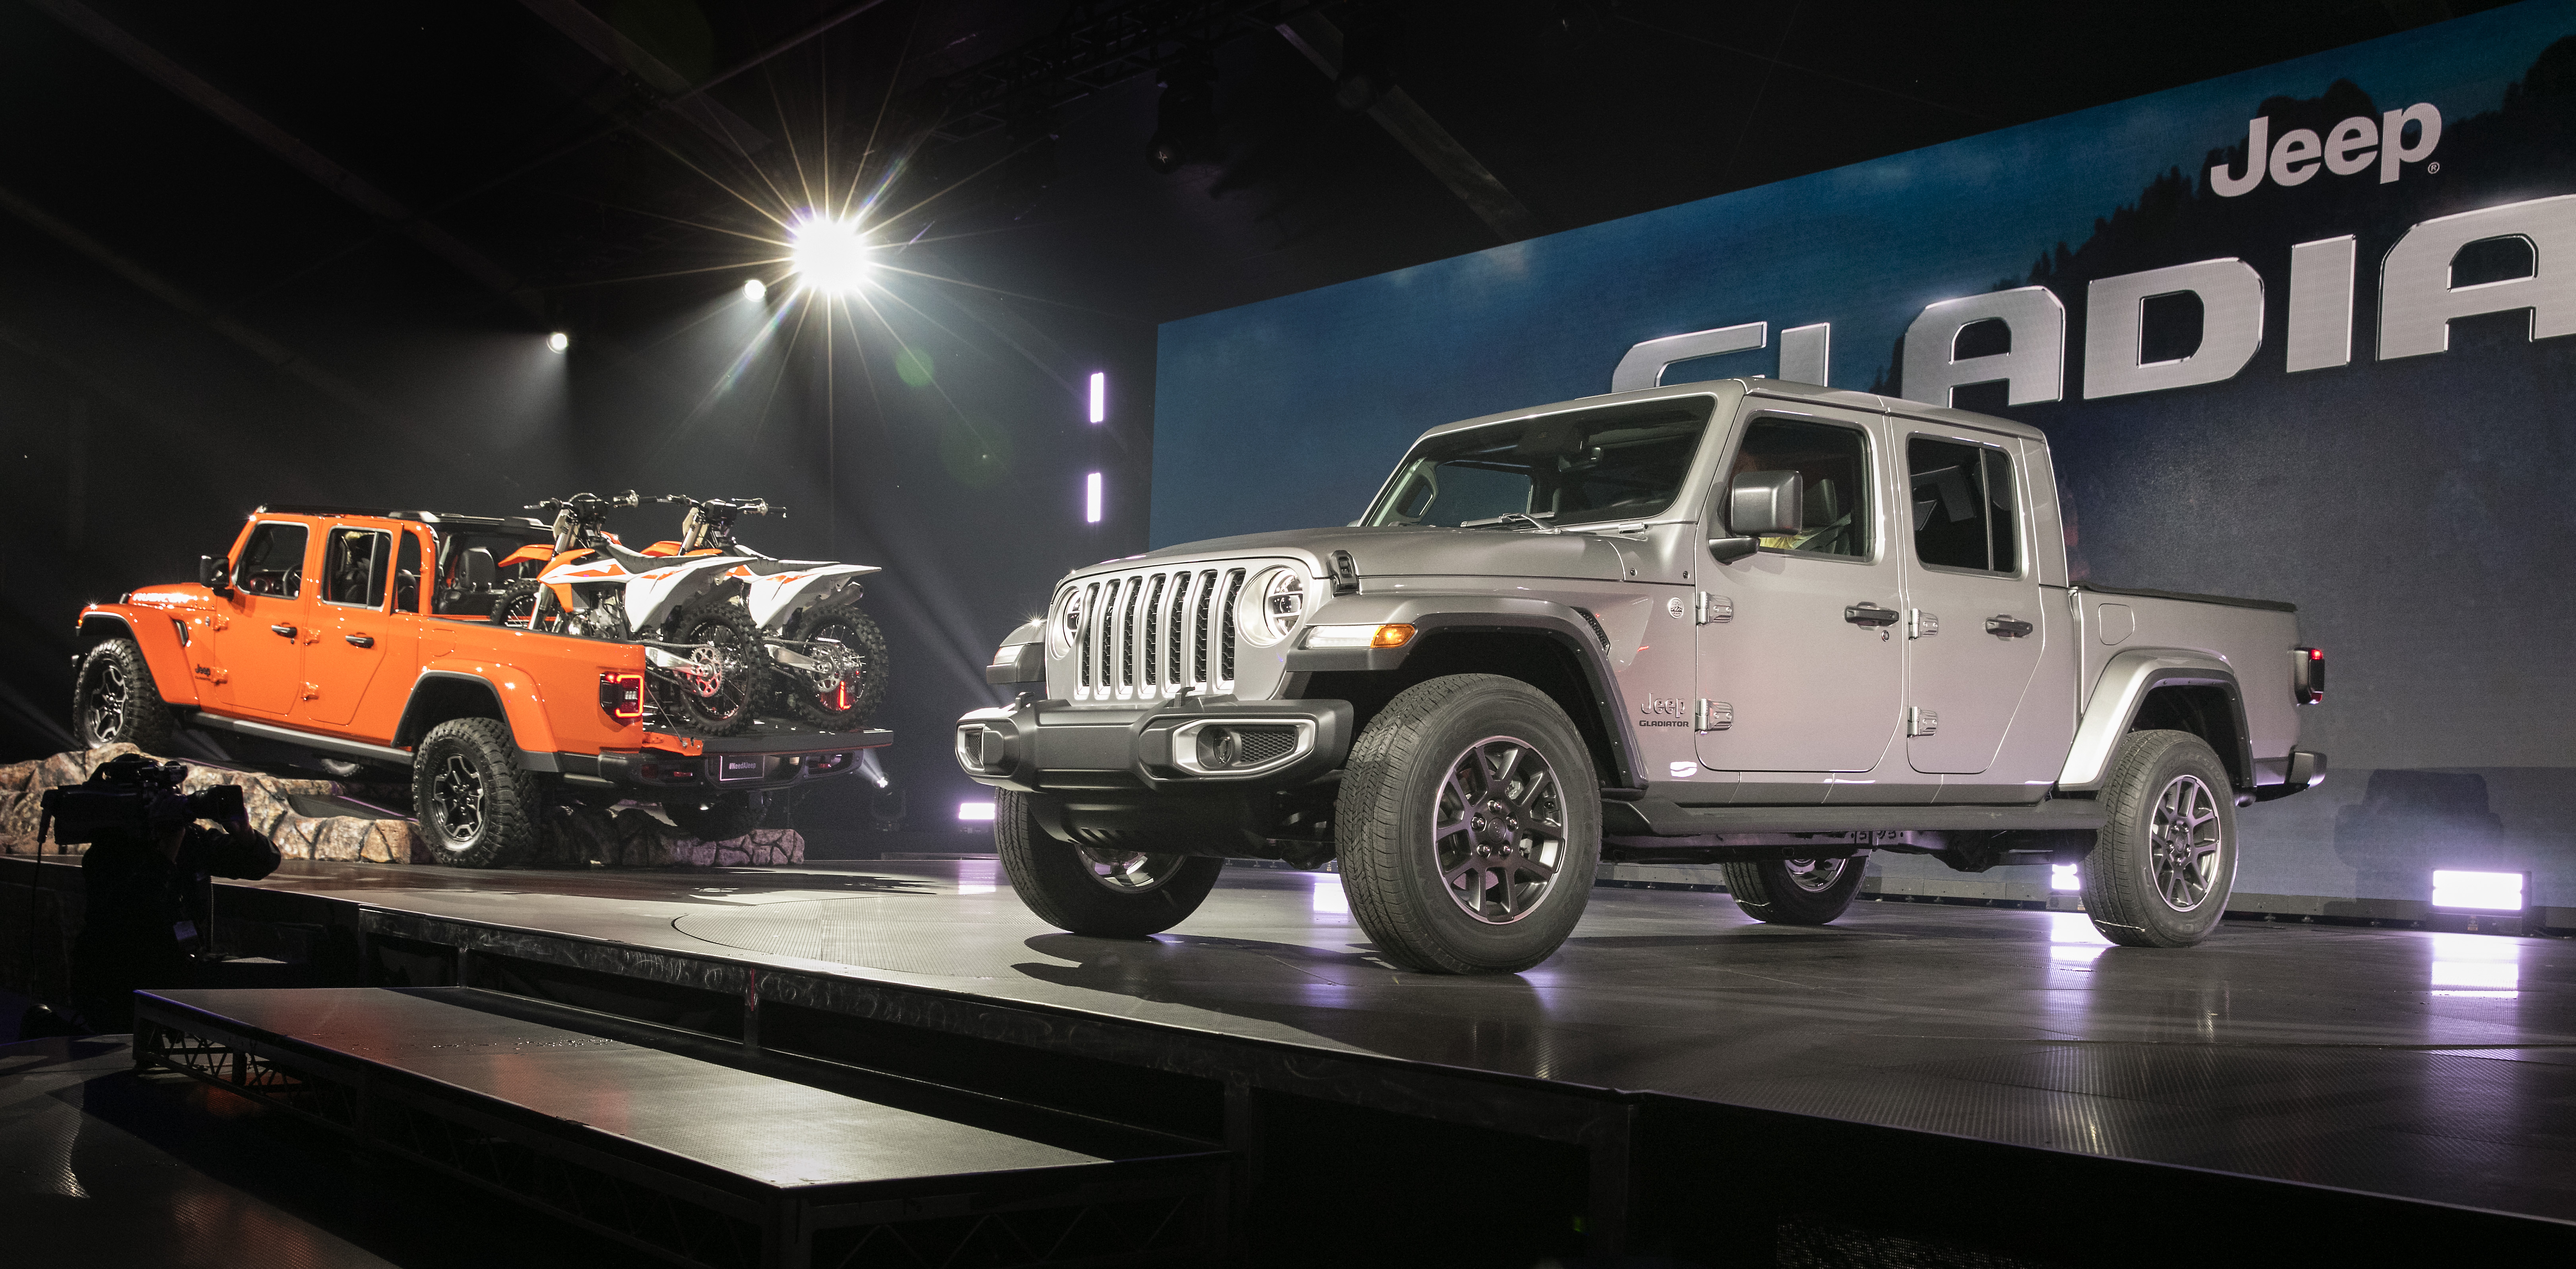 Jeep® introduced the 2020 Jeep Gladiator at the Los Angeles Auto Show. The all-new 2020 Gladiator builds on a rich heritage of tough, dependable Jeep trucks with an unmatched combination of rugged utility, authentic Jeep design, open-air freedom, clever functionality and versatility, best-in-class towing and 4x4 payload, advanced fuel-efficient powertrains, superior on- and off-road dynamics and a host of innovative safety and advanced technology features. The all-new 2020 Gladiator is available in a crew cab model in multiple trim configurations.